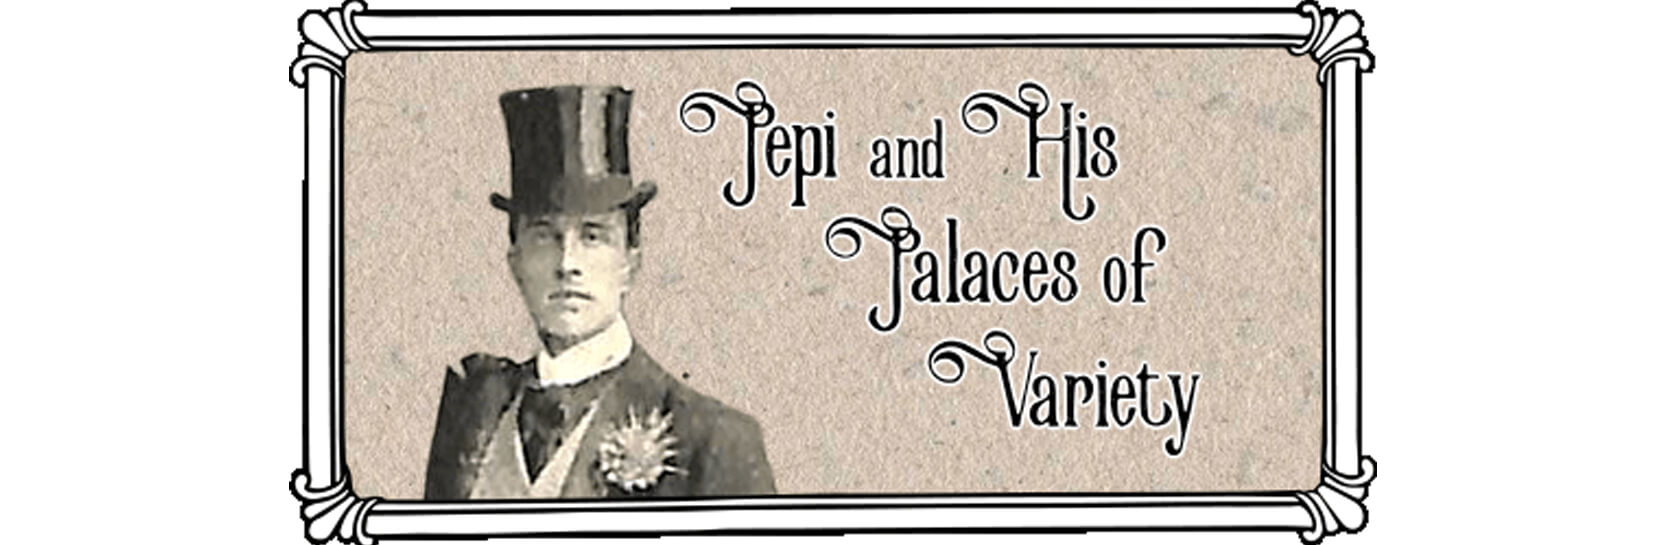 Darlington Hippodrome Teacher Notes - Topic 1 - Pepi and his Palaces of Variety